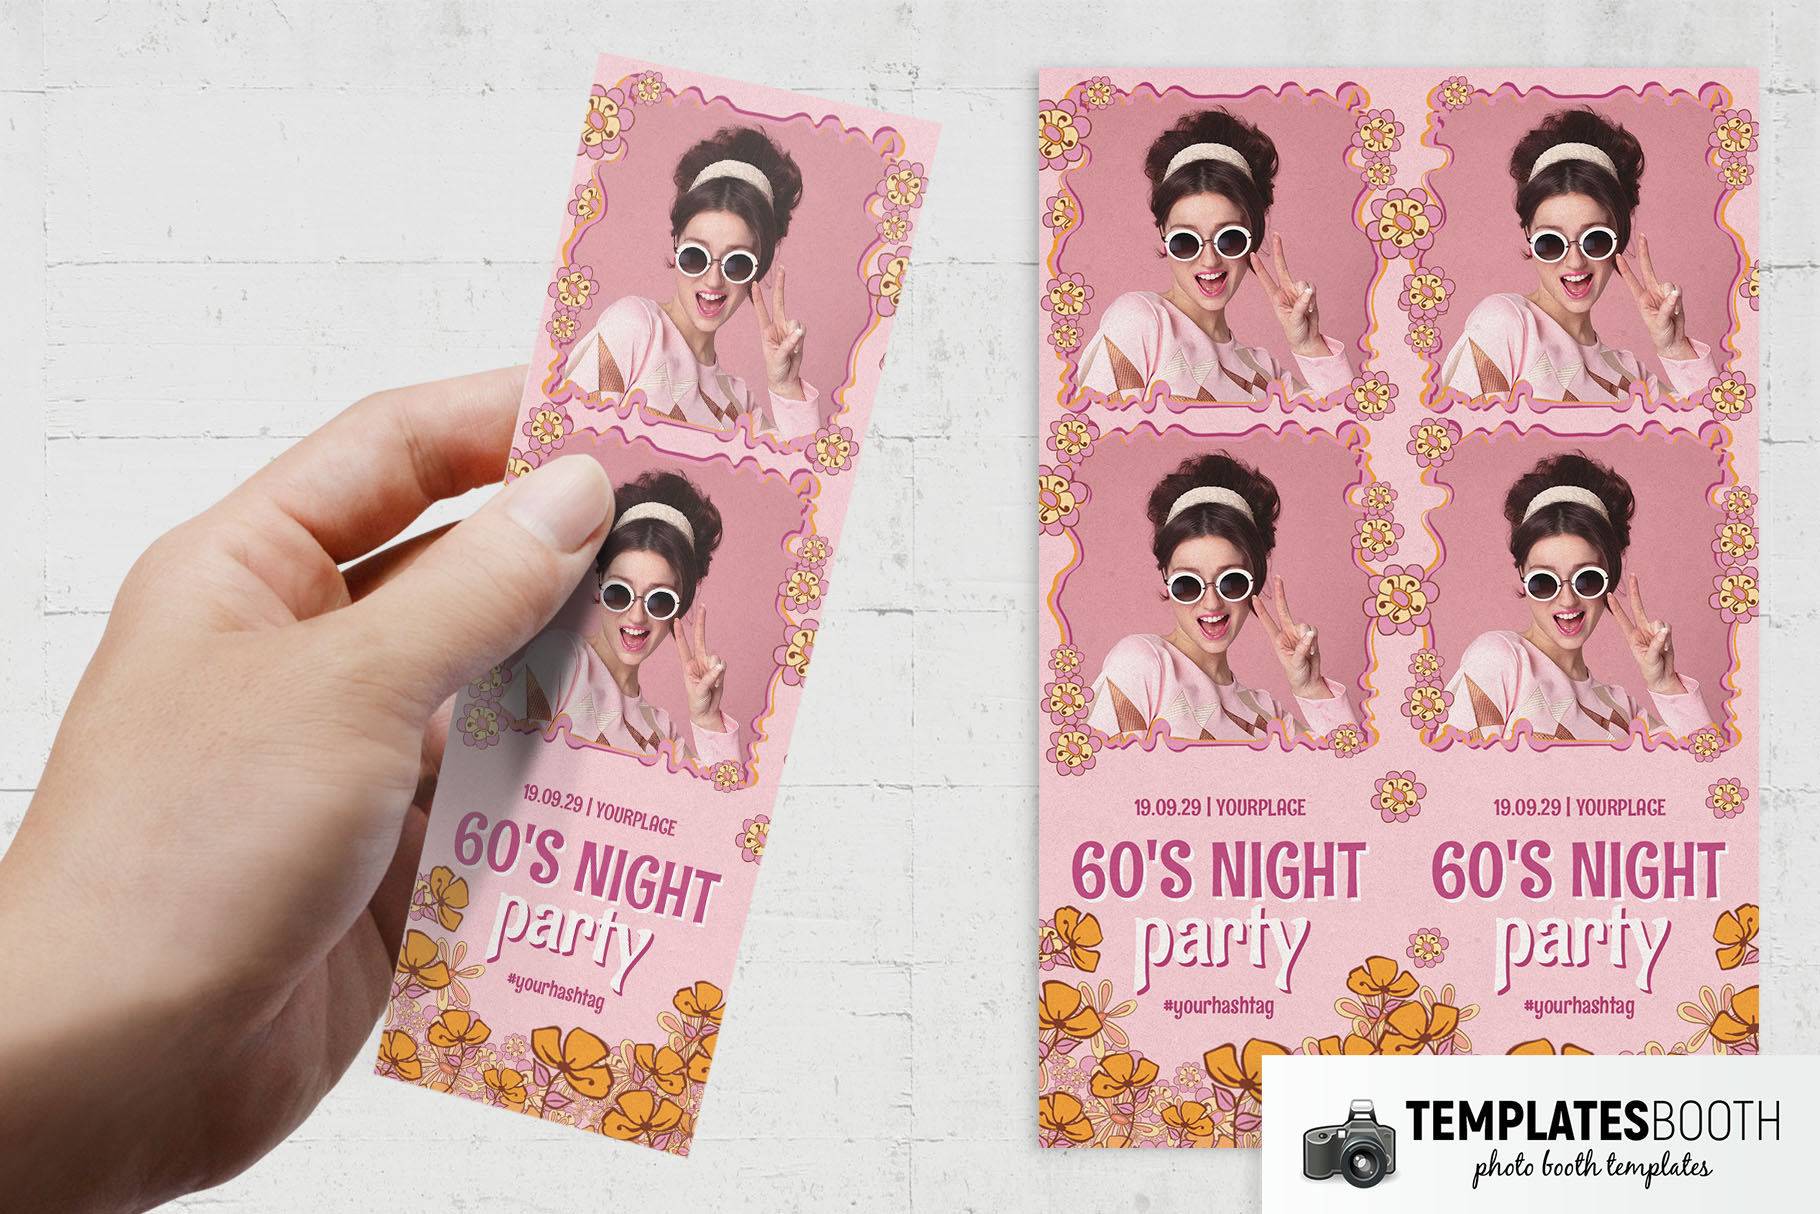 60s Night Photo Booth Template